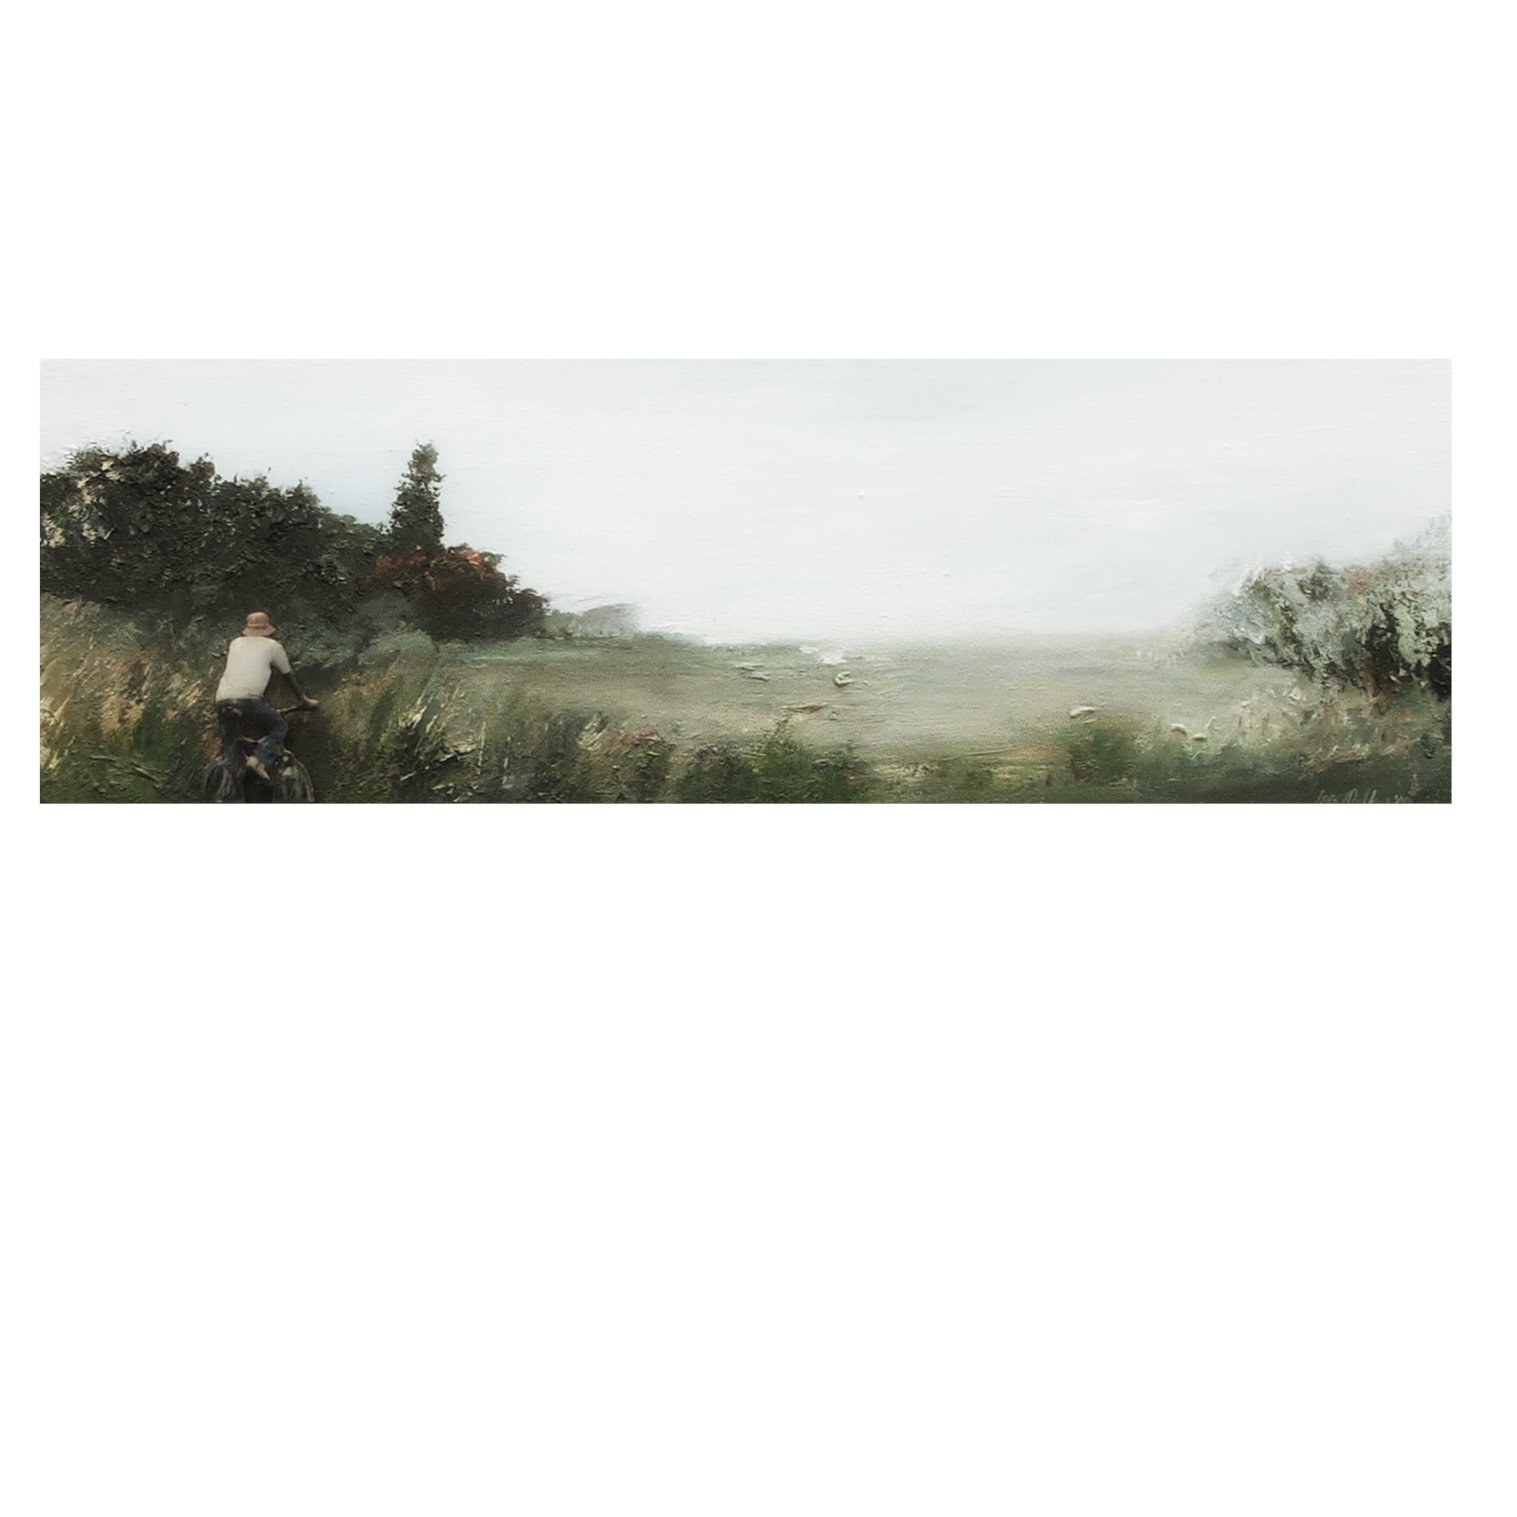 Pedalling through Fields - Oil on Canvas with photo image - wb15x46cm - wb2.JPG